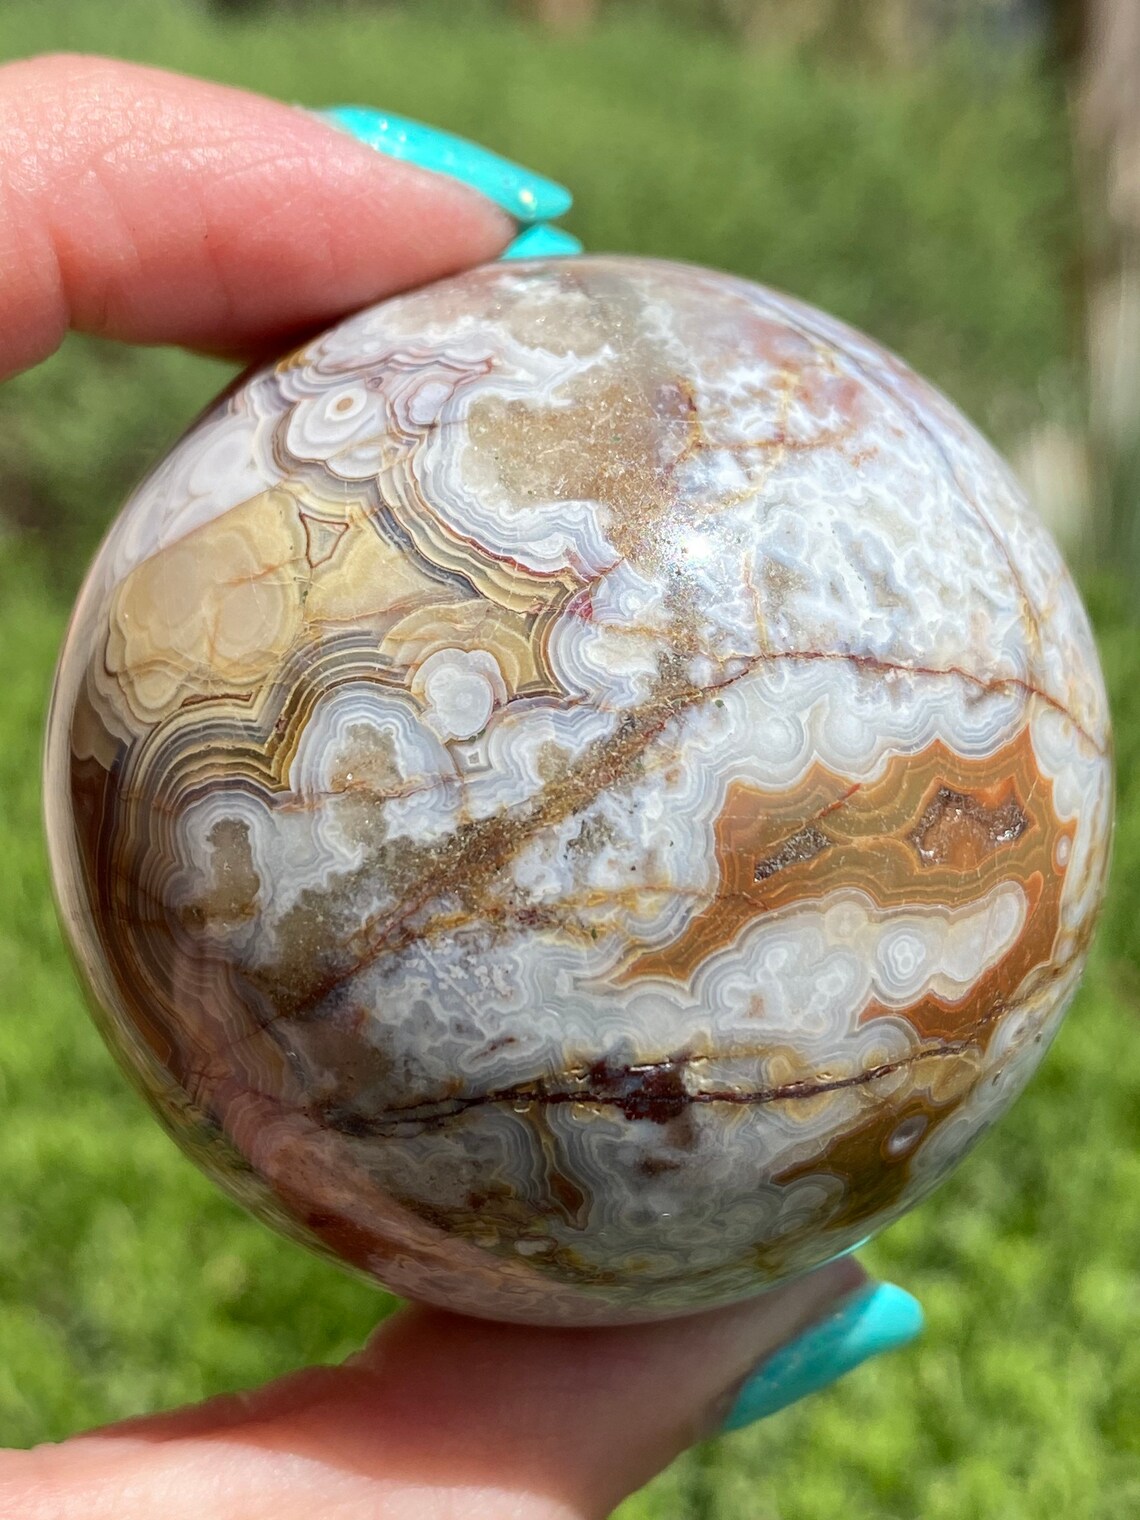 55mm Crazy Lace Agate Sphere w/ Stand 232g | Etsy